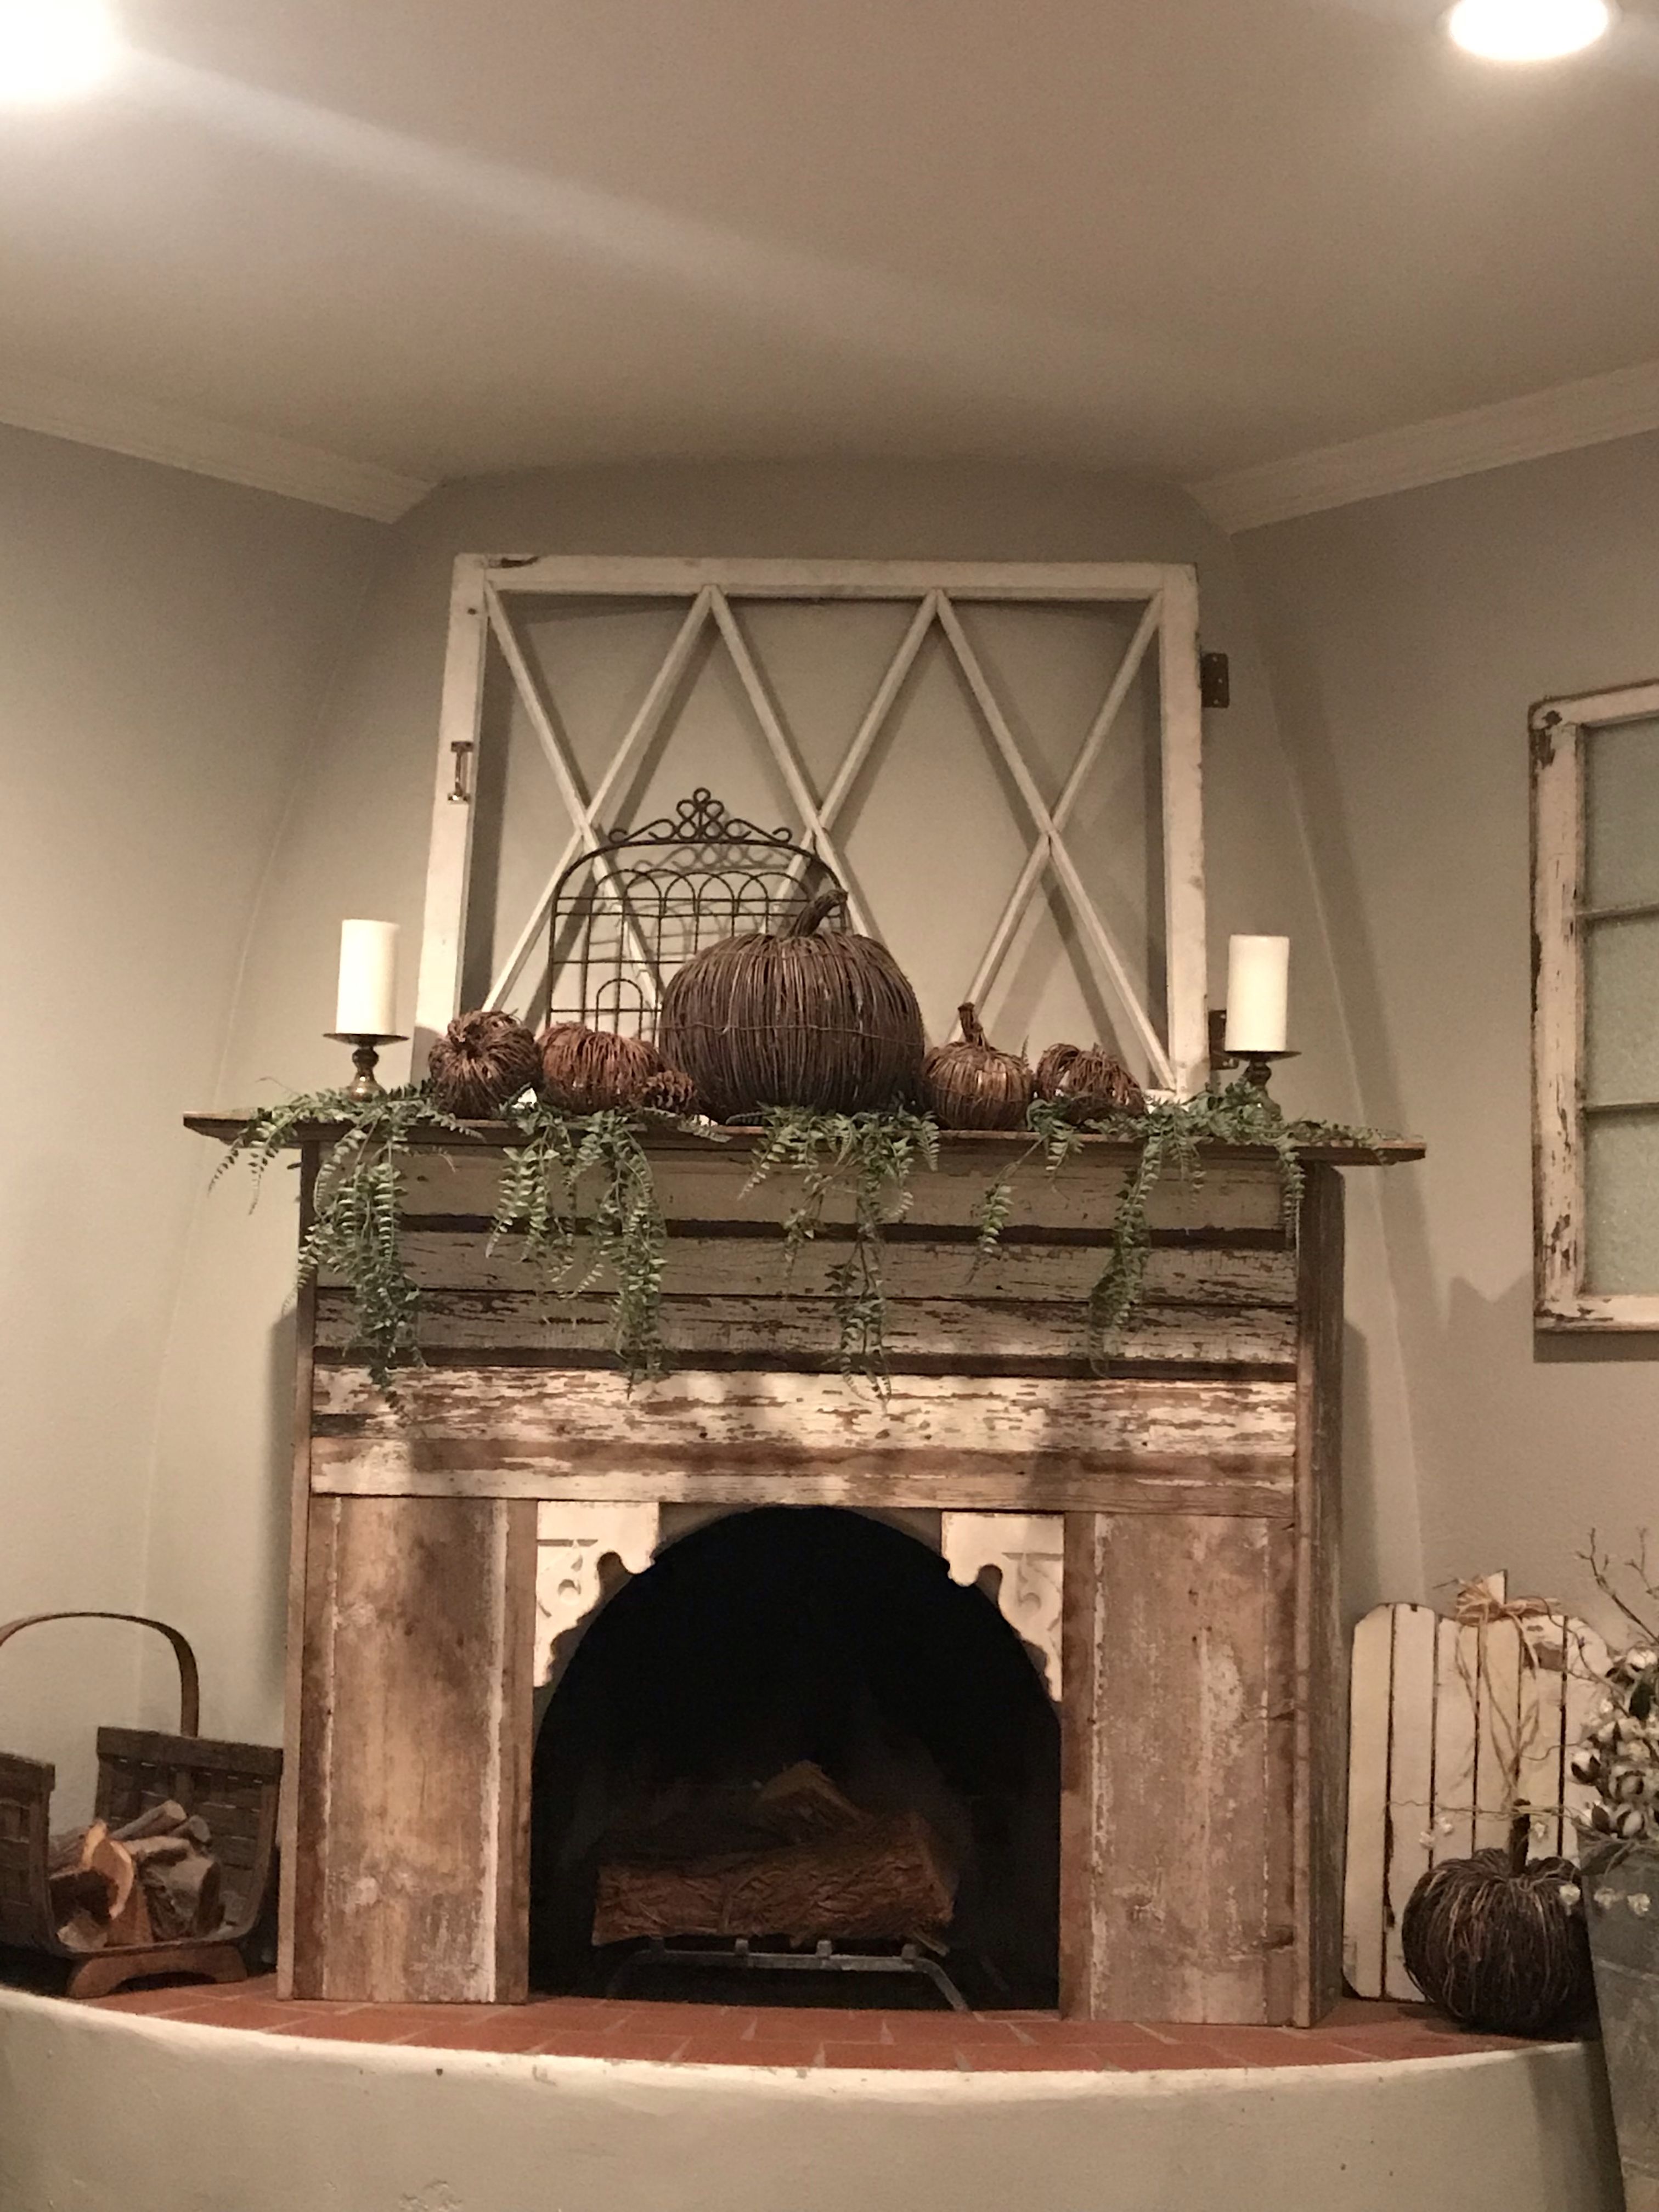 Condor Fireplace Lovely Pin by Fools Farmhouse On Fools Farmhouse In 2019